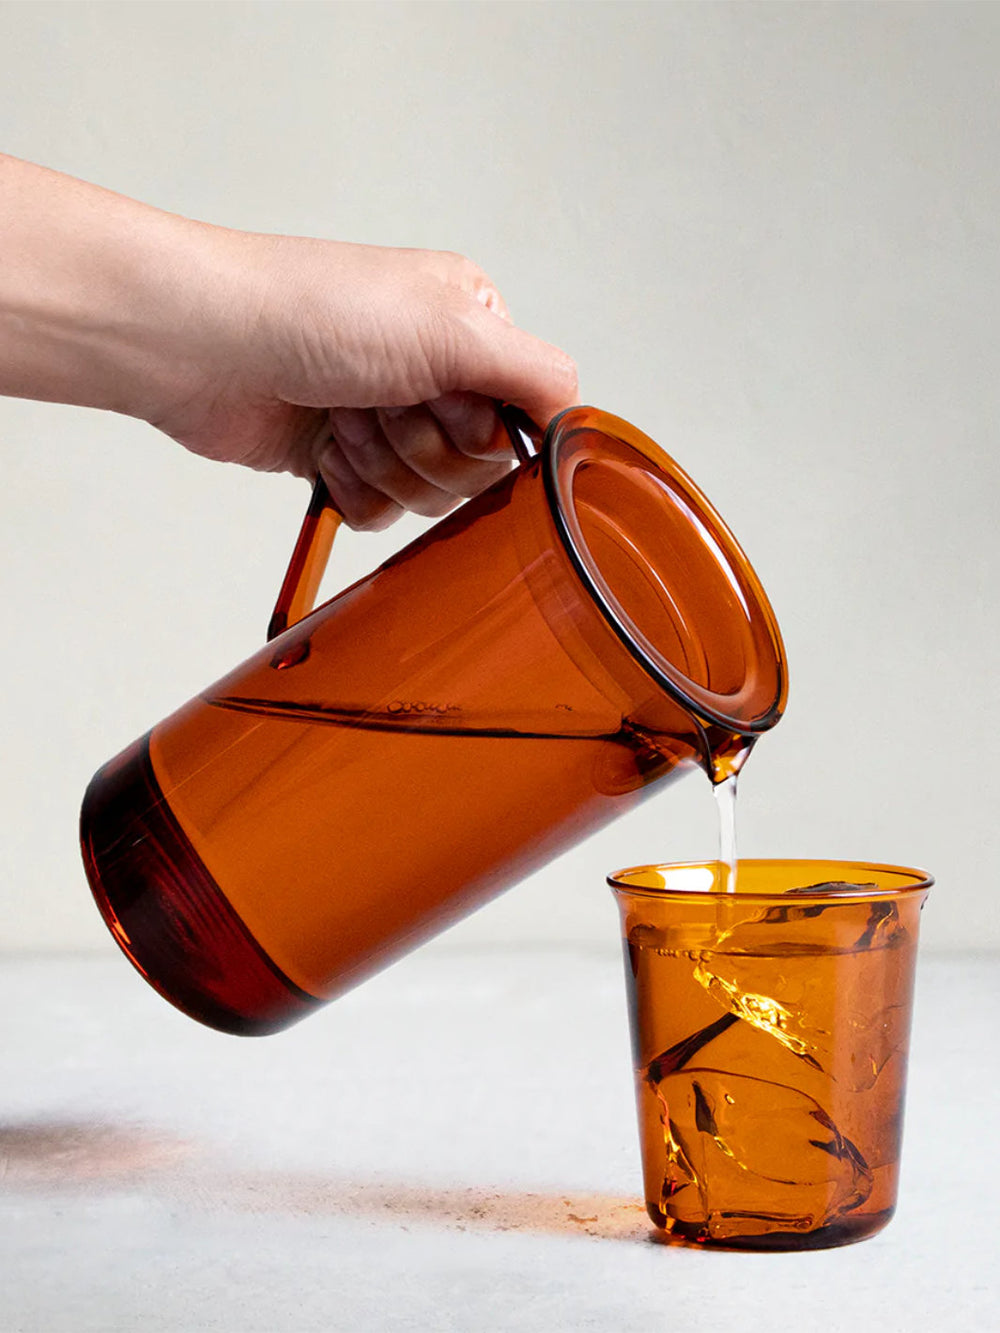 https://cdn.shopify.com/s/files/1/2404/0687/products/kinto_21463_cast-amber-jug-750ml_pouring-water_alt.jpg?v=1669833561&width=1000